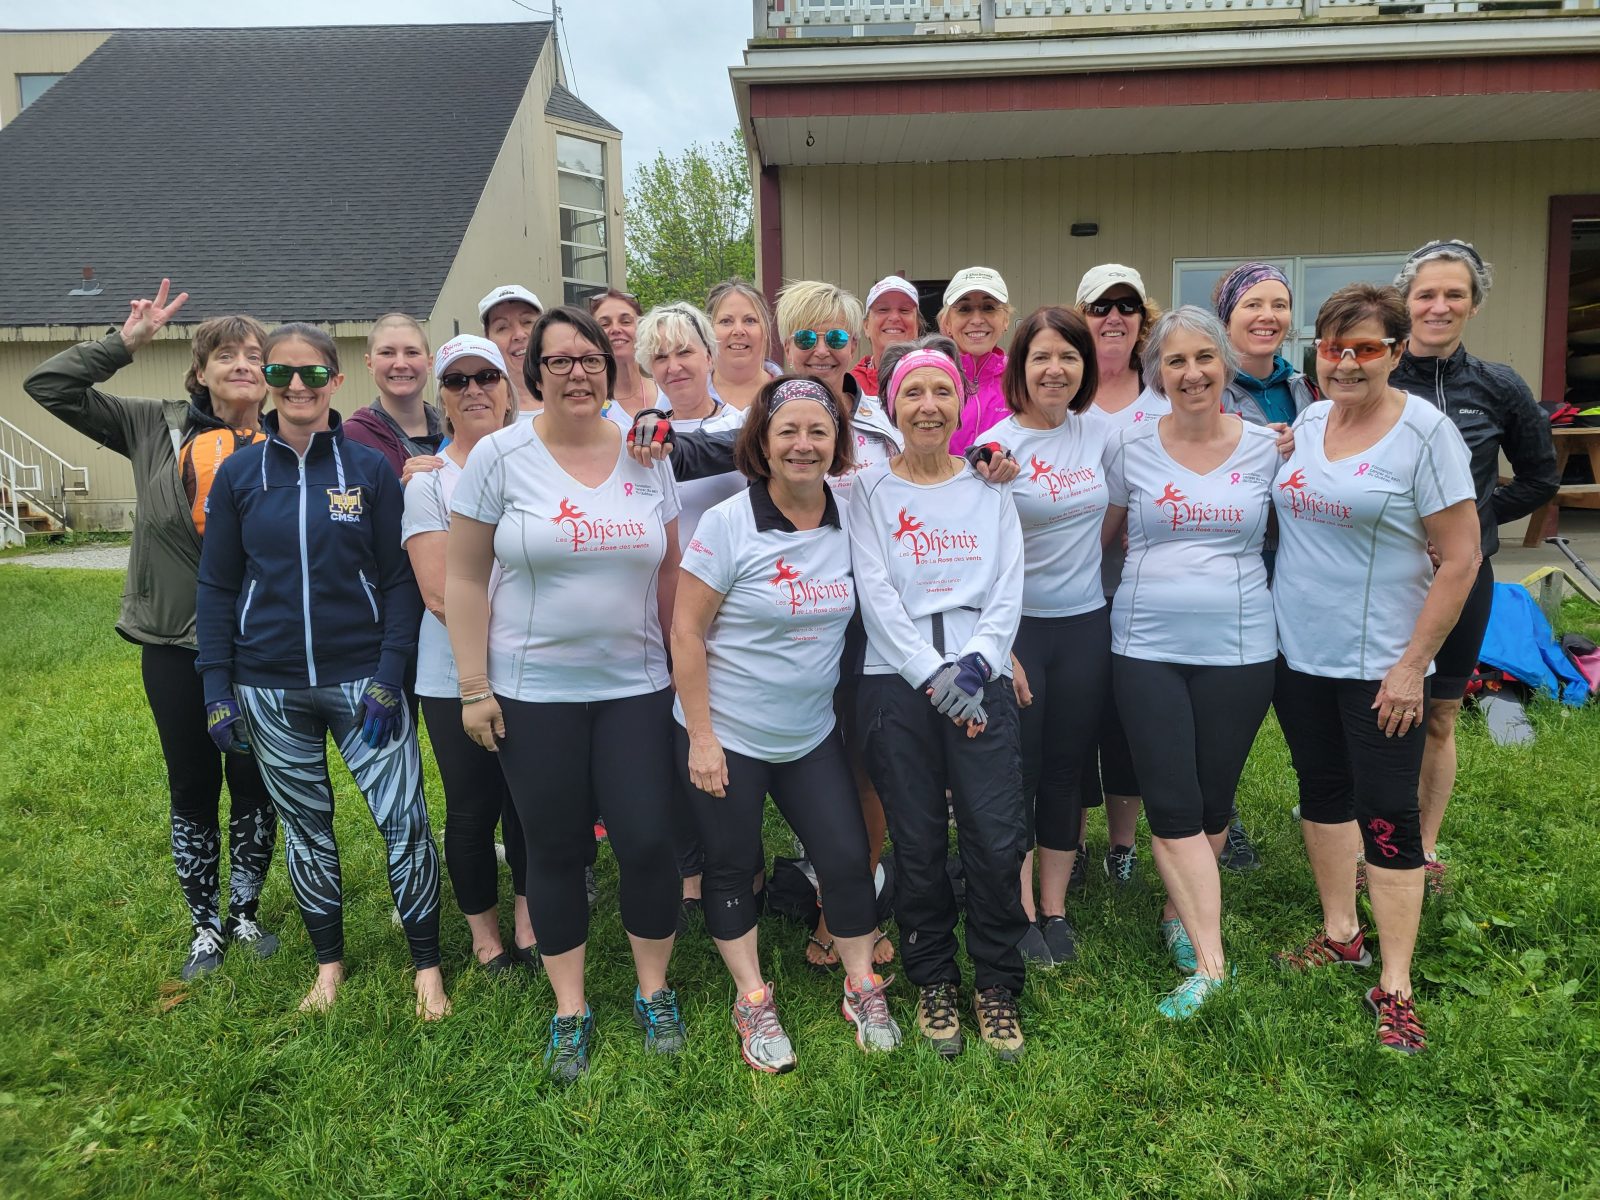 Phenix dragonboat team celebrates 20 years of fighting cancer